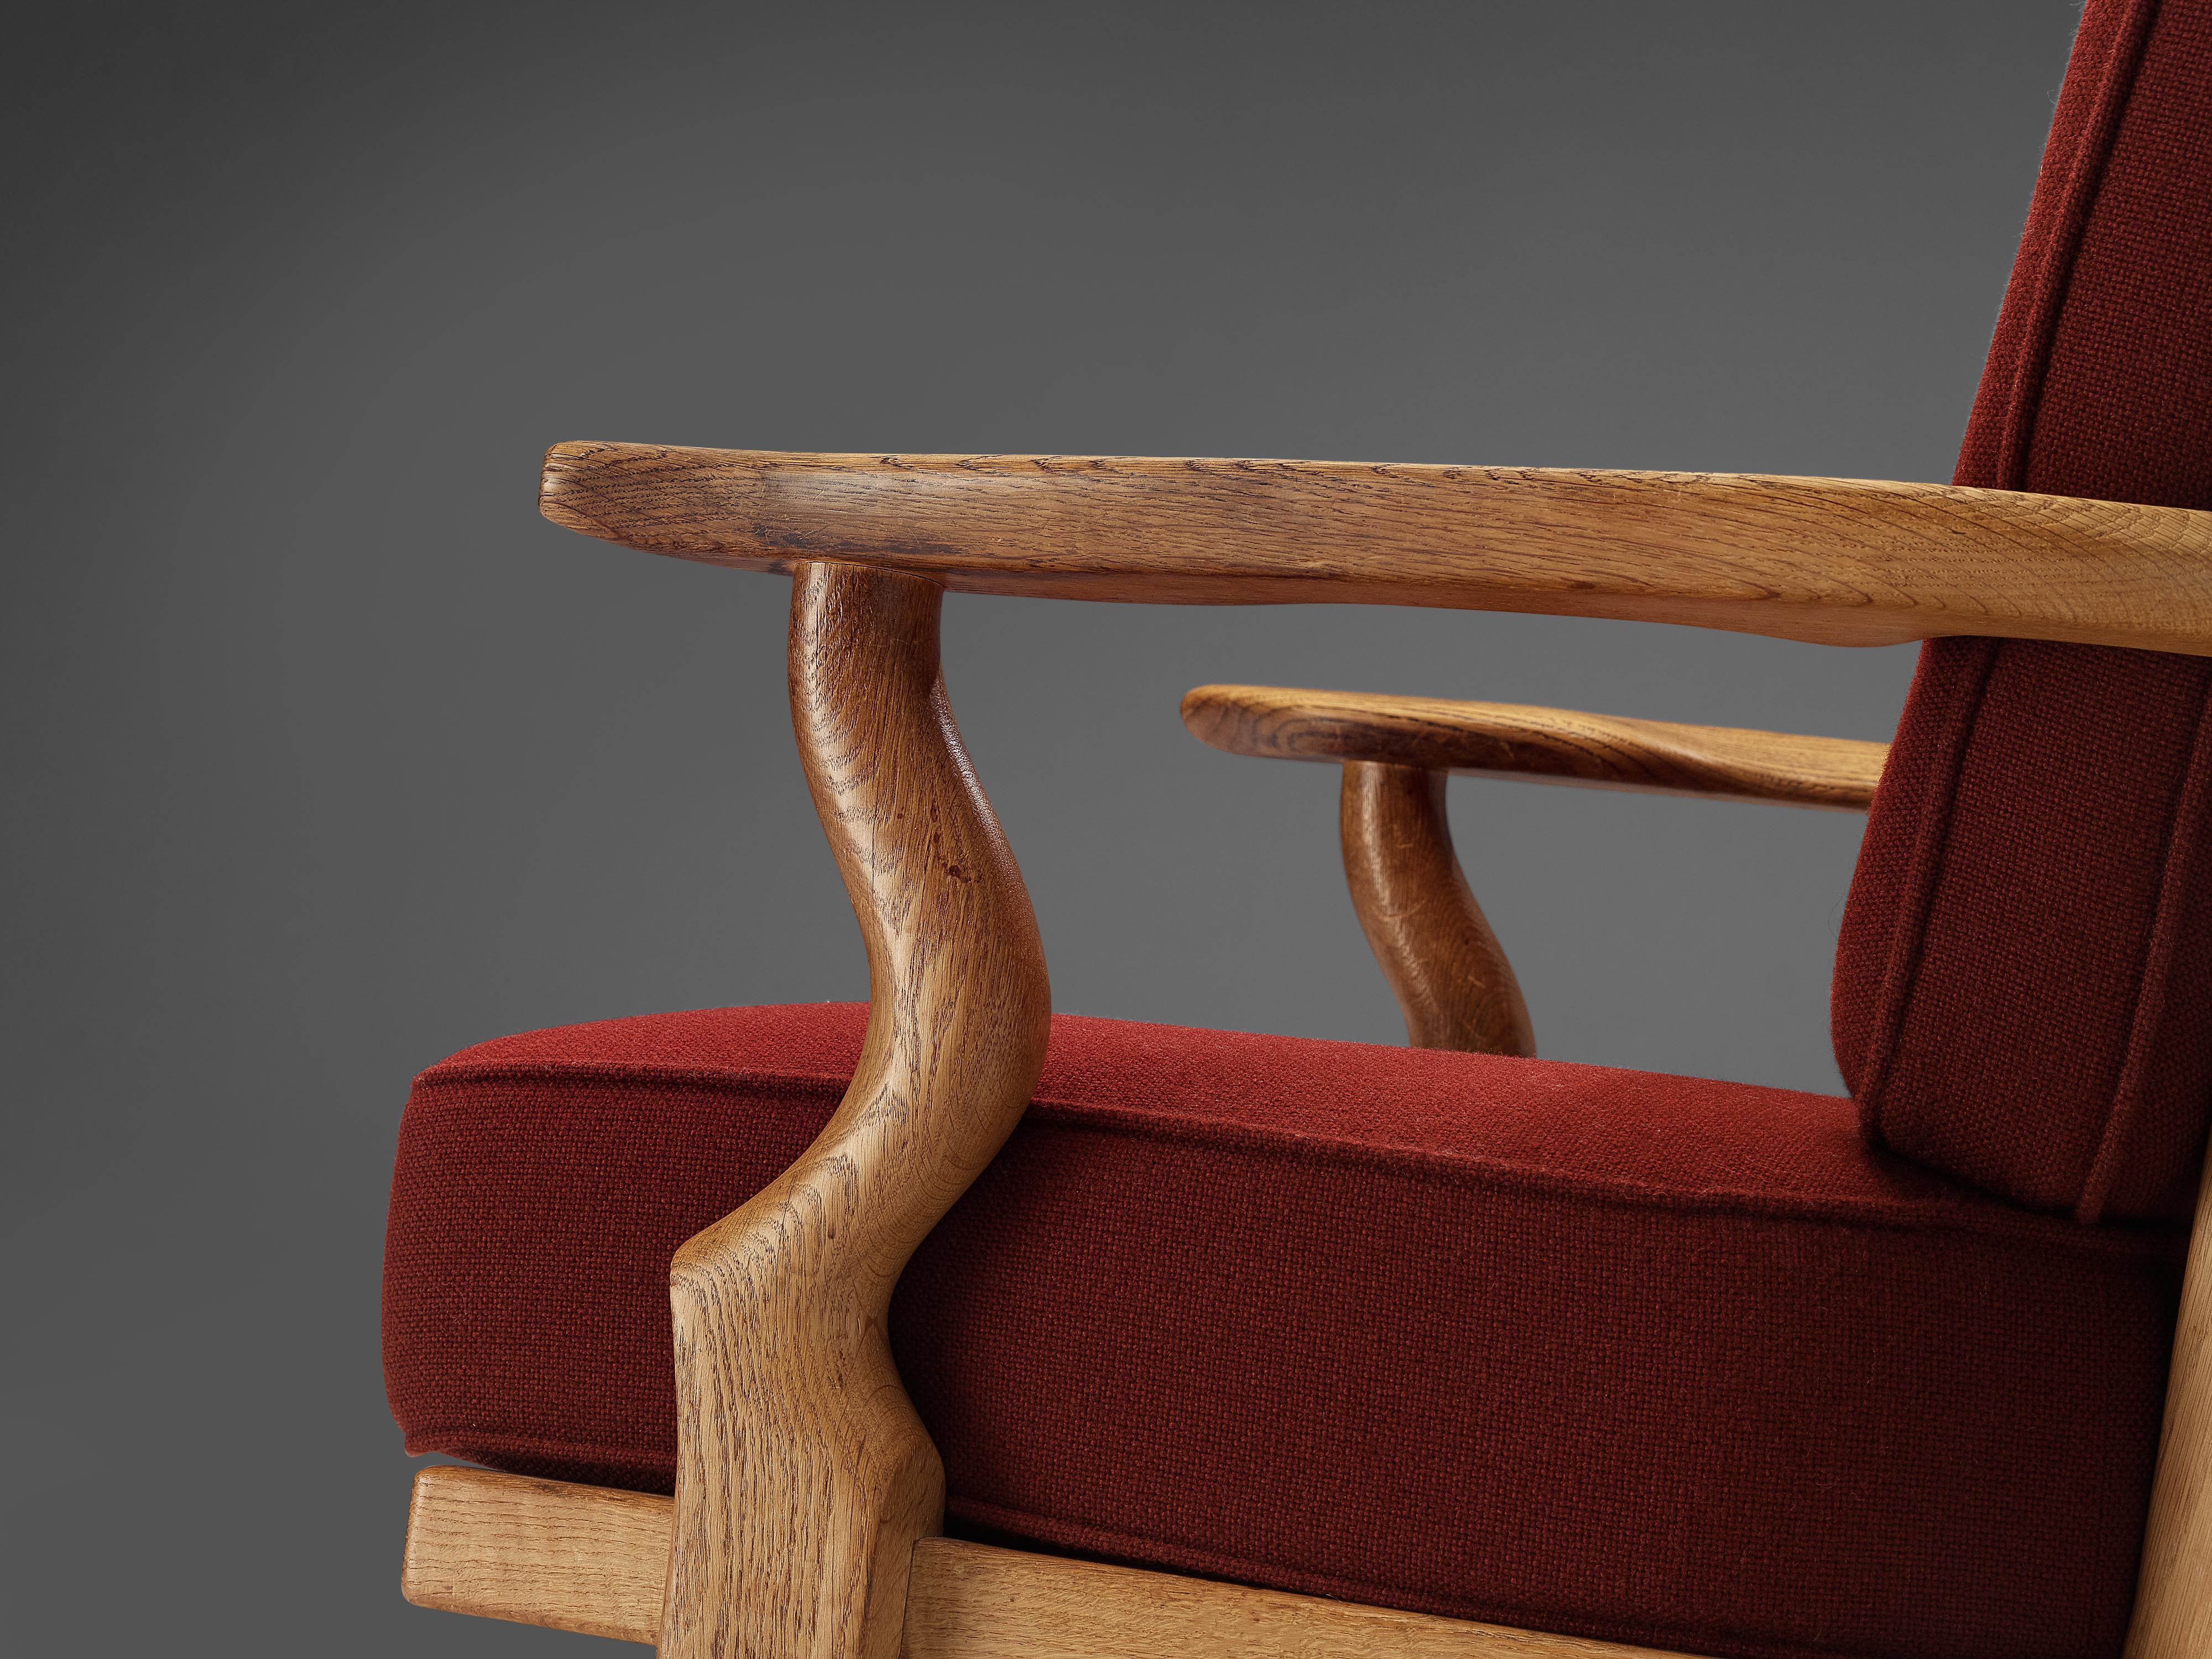 Guillerme & Chambron 'Grand Repos' Lounge Chair in Red Upholstery and Oak